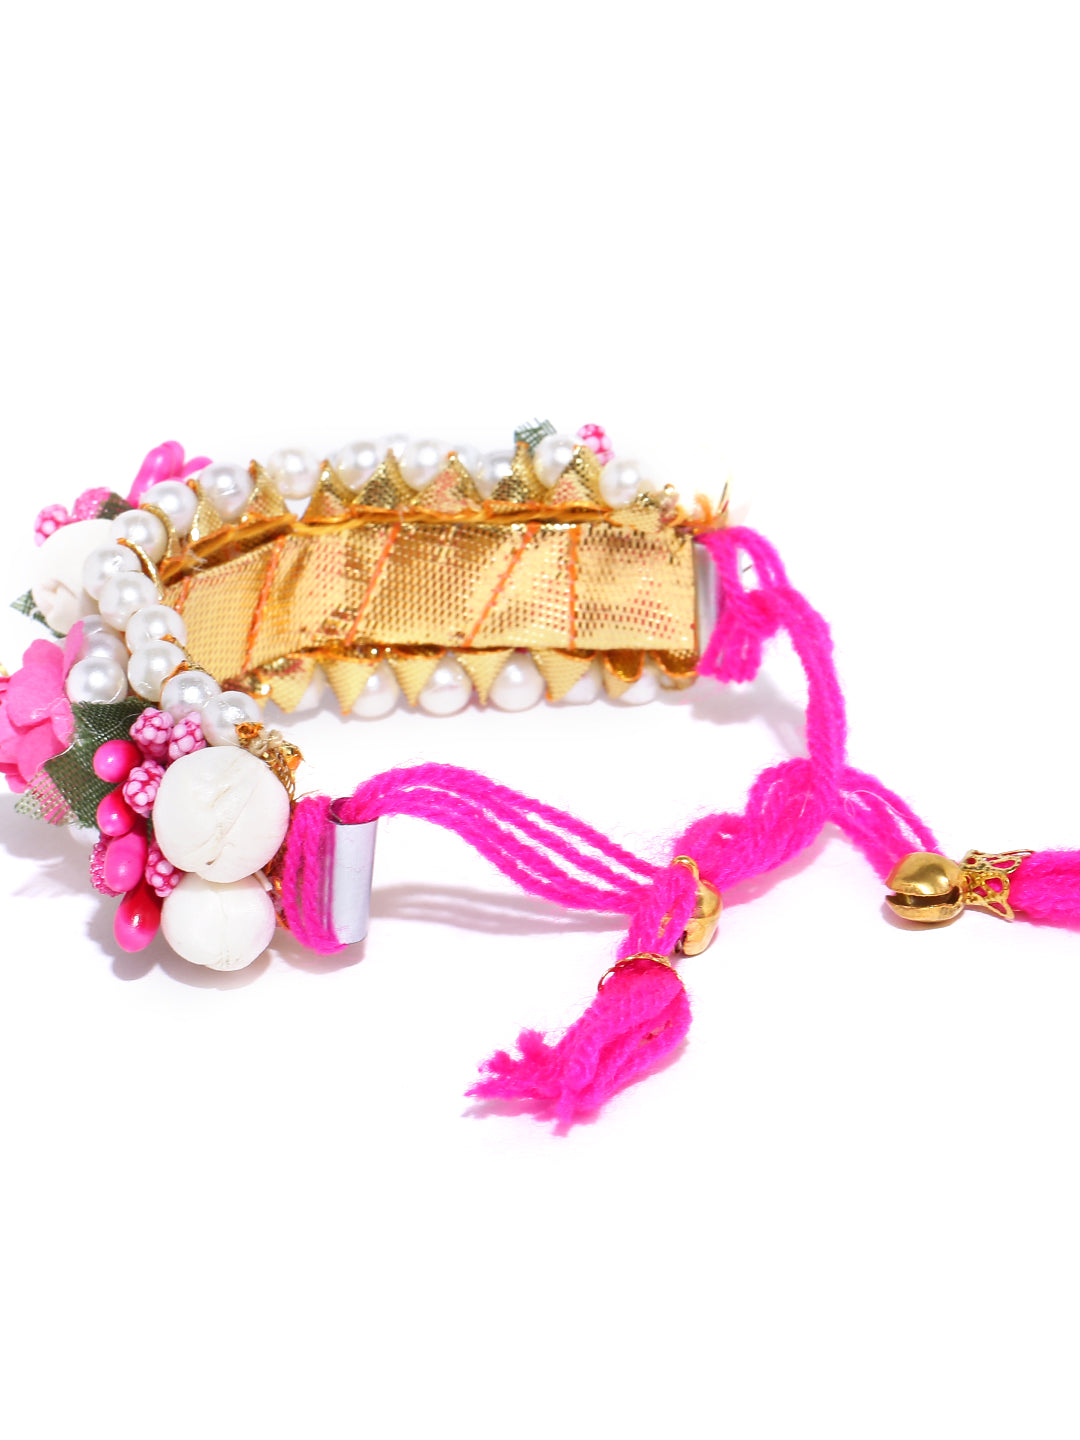 Priyaasi Floral Handcrafted Hathphool in Pink and White Color